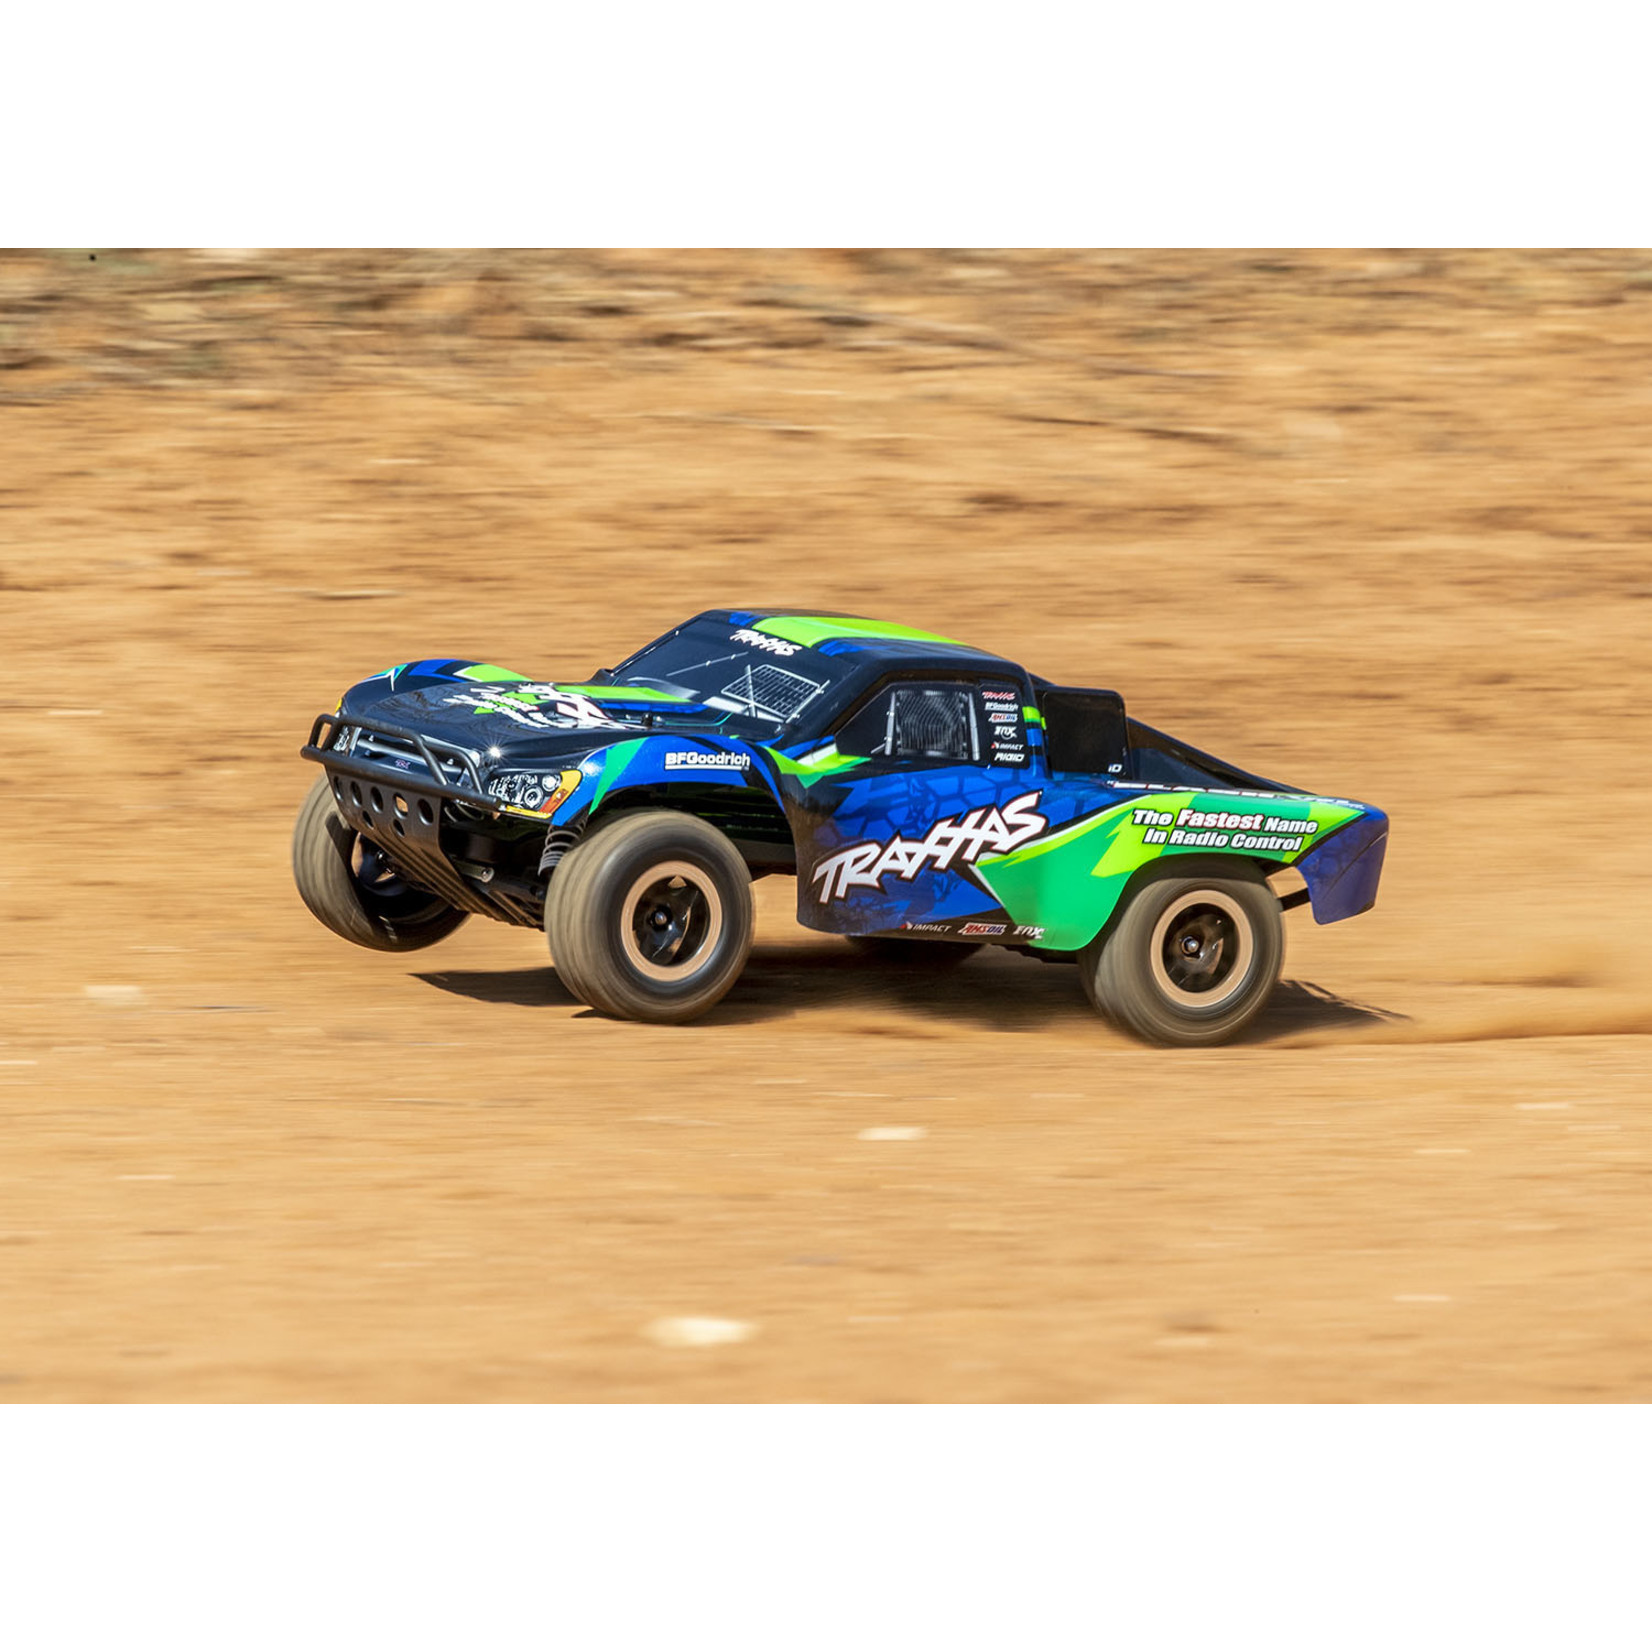 Traxxas 58076-74-GRN Slash VXL:  1/10 Scale 2WD Short Course Racing Truck with TQi™ Traxxas Link™ Enabled 2.4GHz Radio System & Traxxas Stability Management (TSM)®